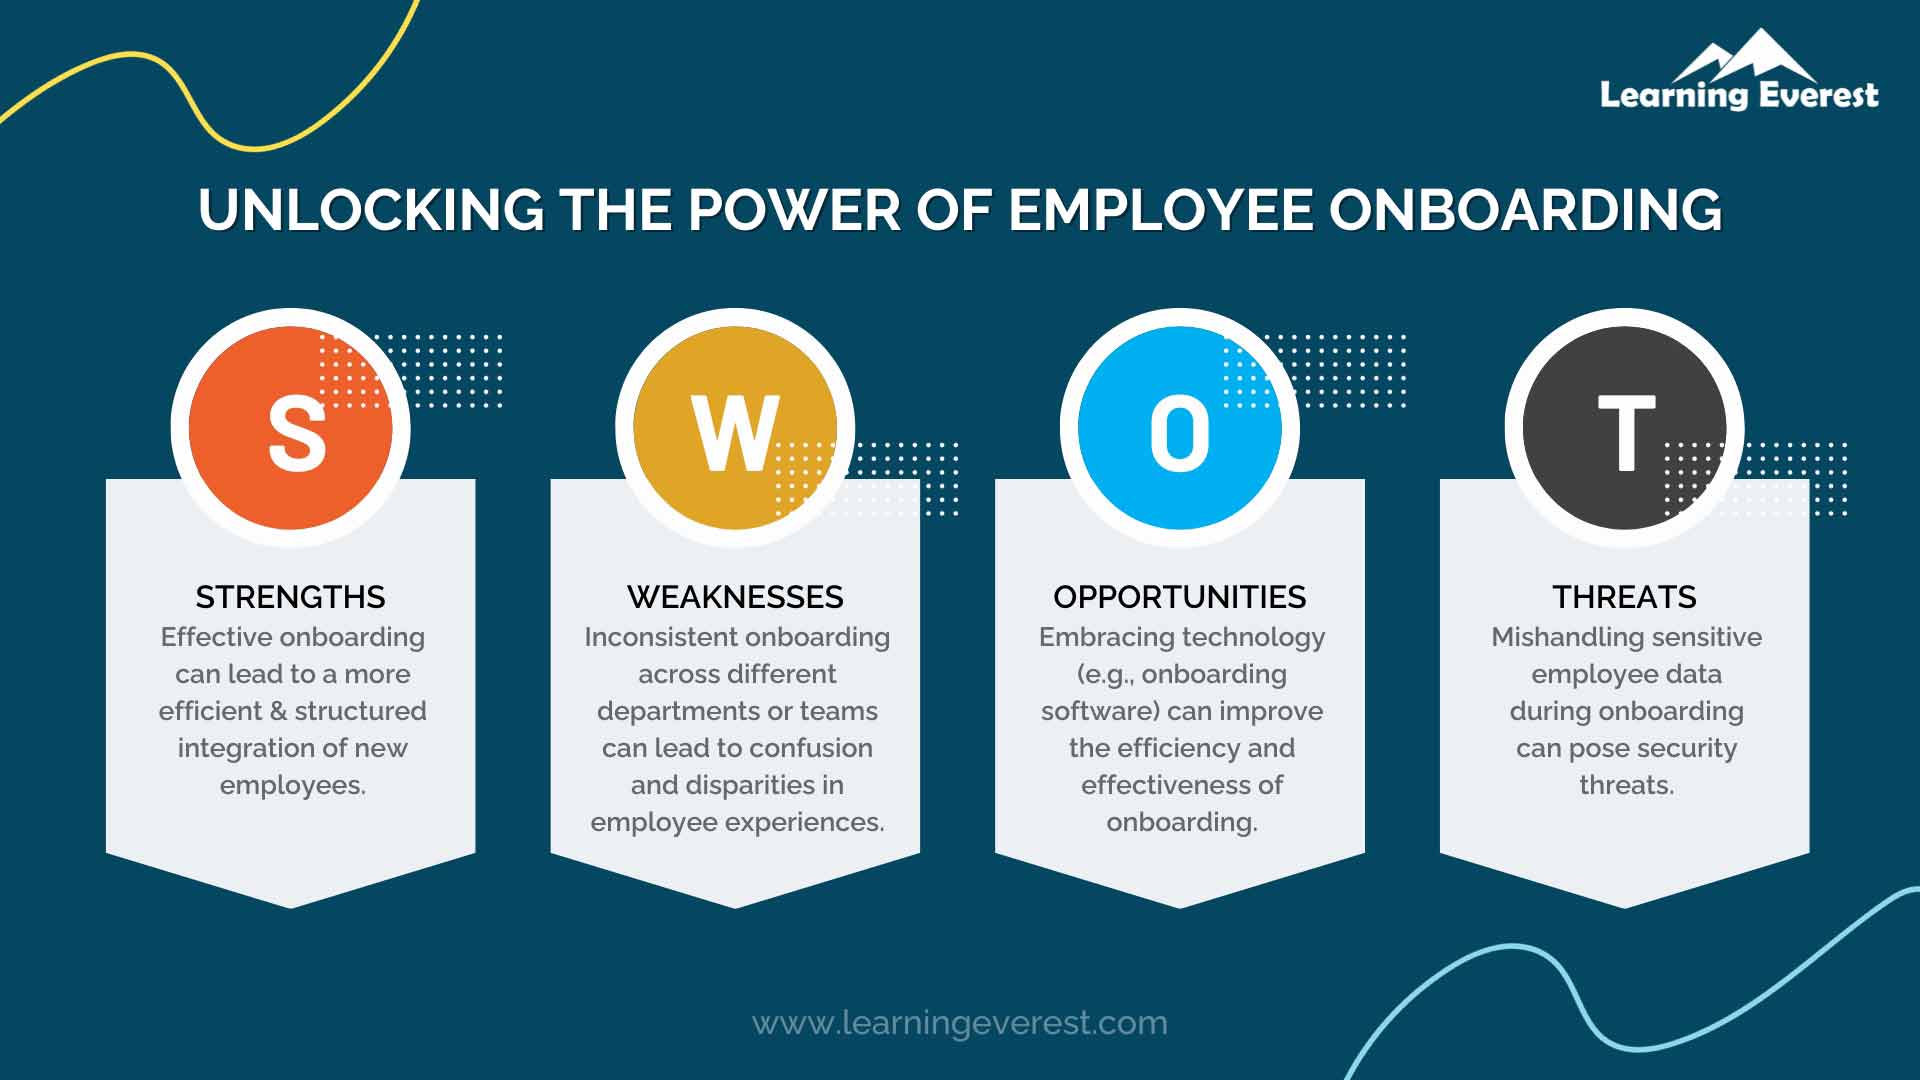 Phases of Employee Onboarding - Introductions